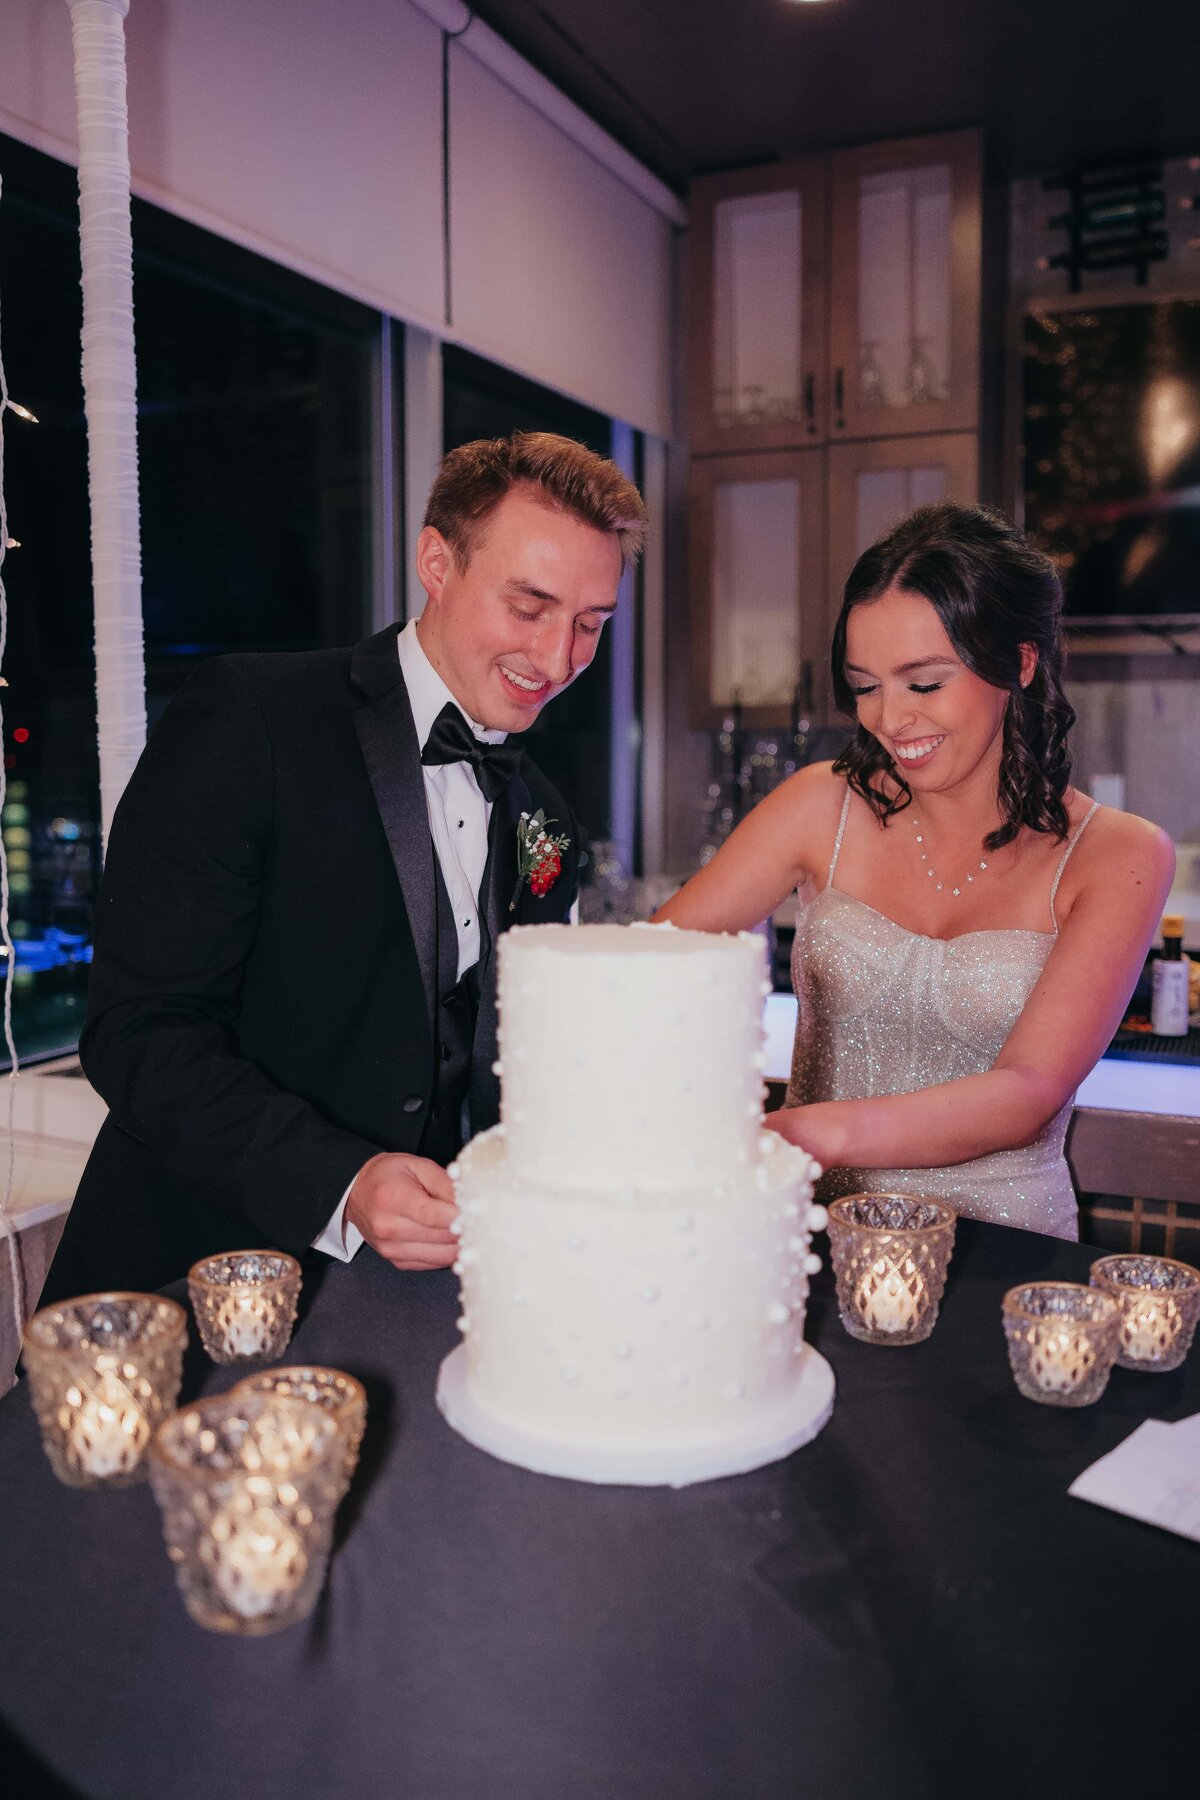 A smiling couple in formal attire cutting a three-tiered wedding cake surrounded by candlelit tables at a reception in a park farm winery.